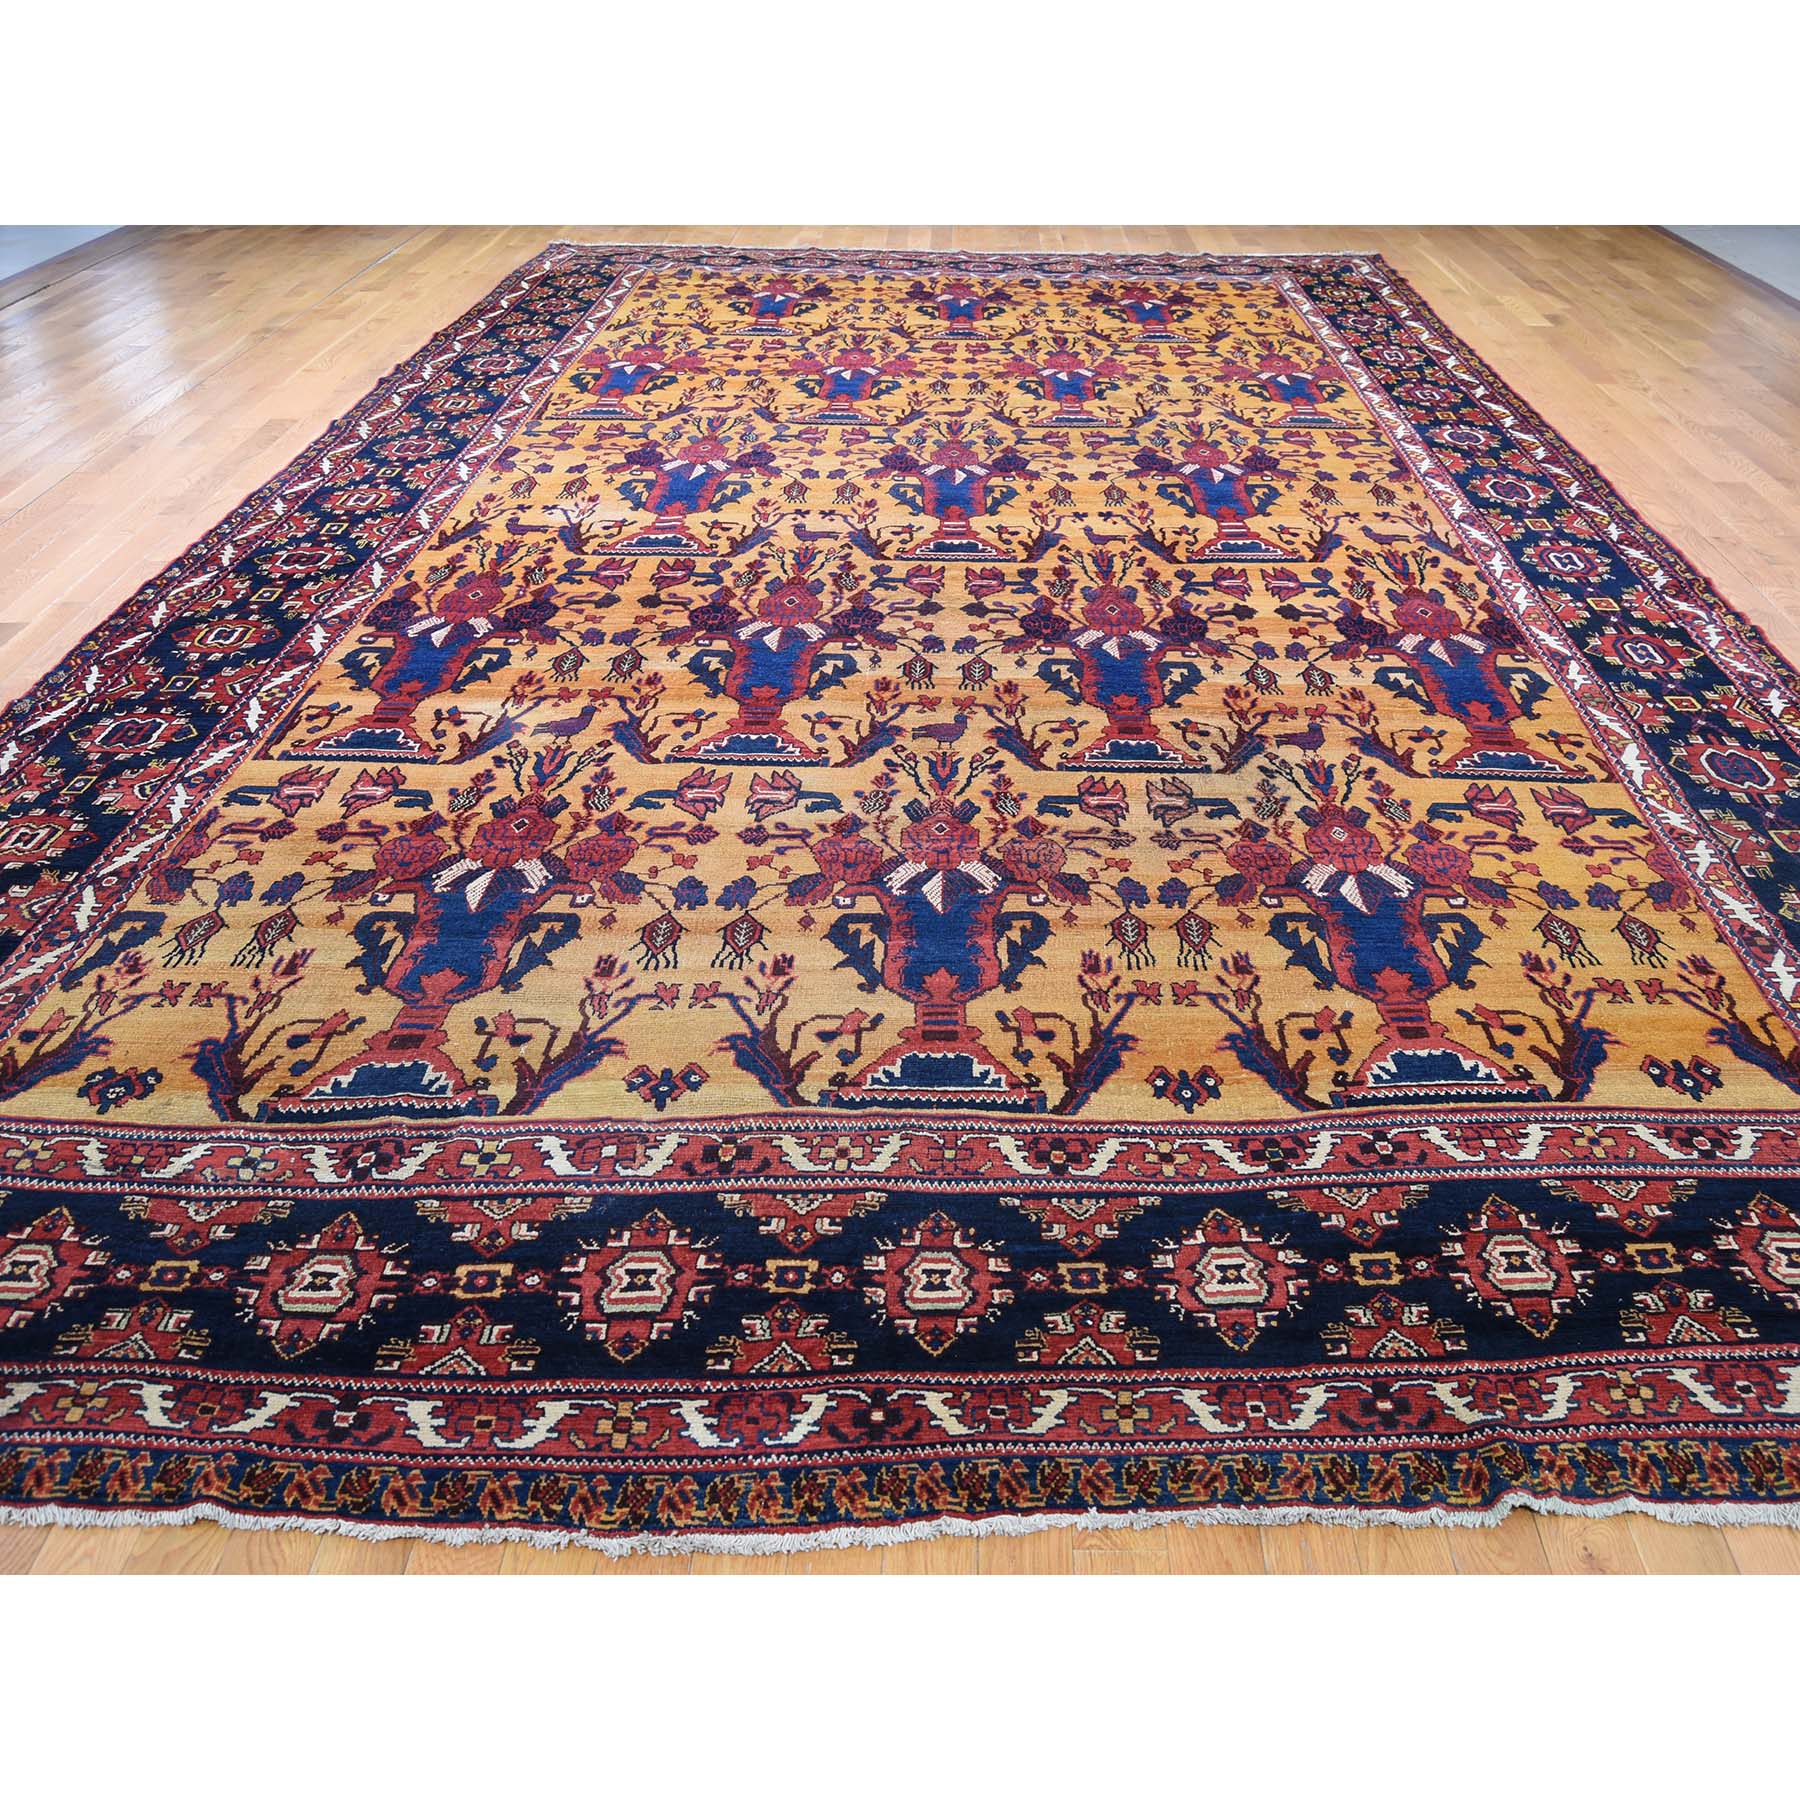 10'4"x17'7" Antique Persian Gallery Size Bakhtiari Pure Wool Hand Woven Oriental Rug 